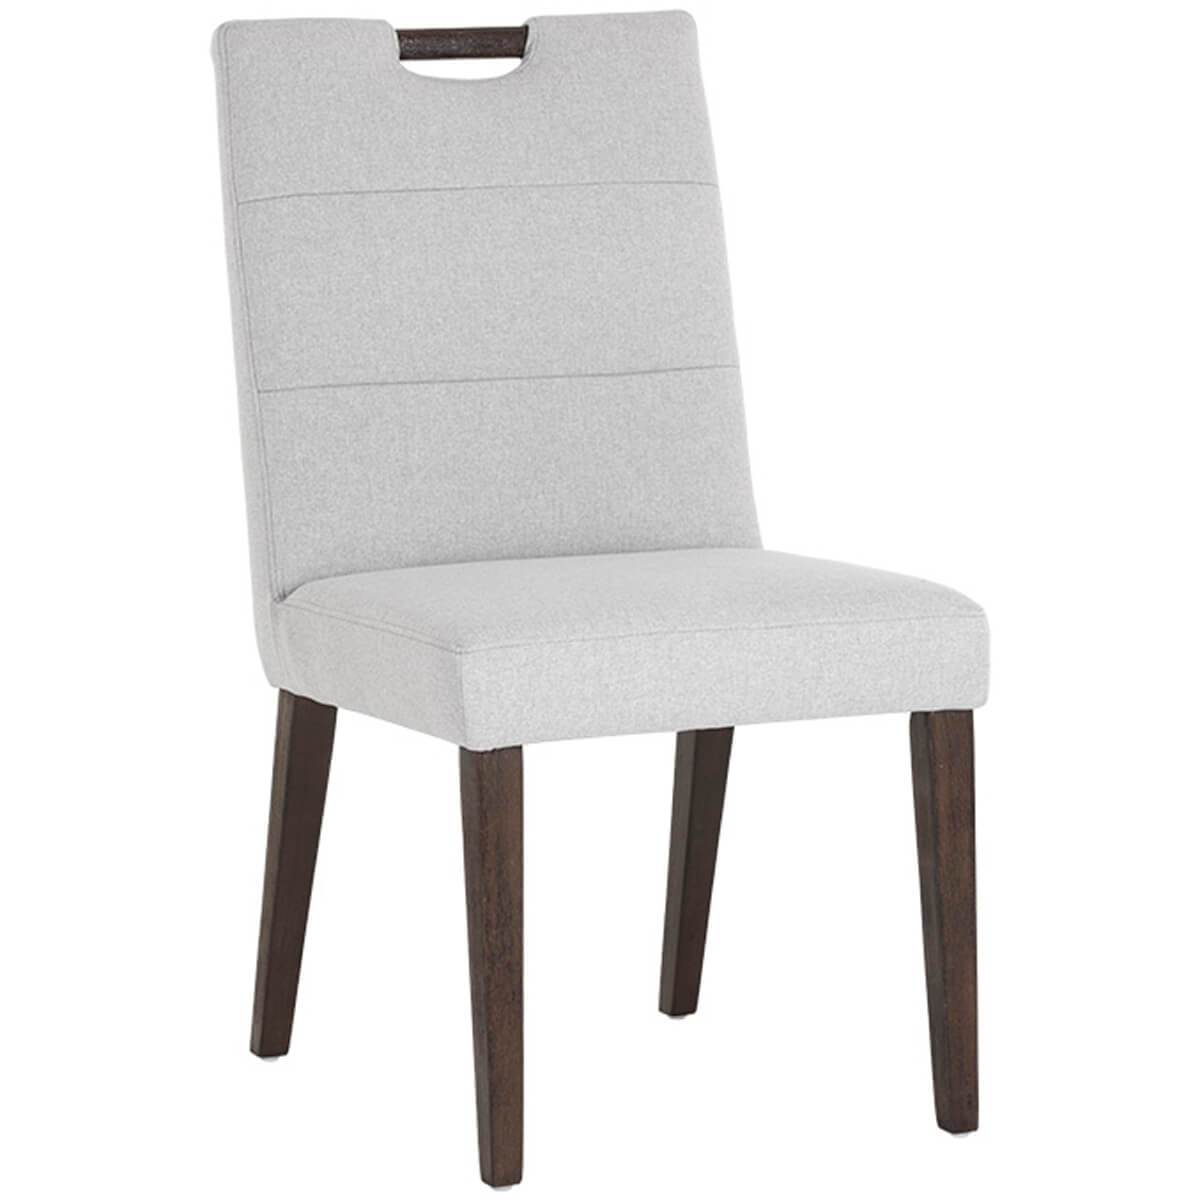 Image of Tory Dining Chair, Light Grey, Set of 2